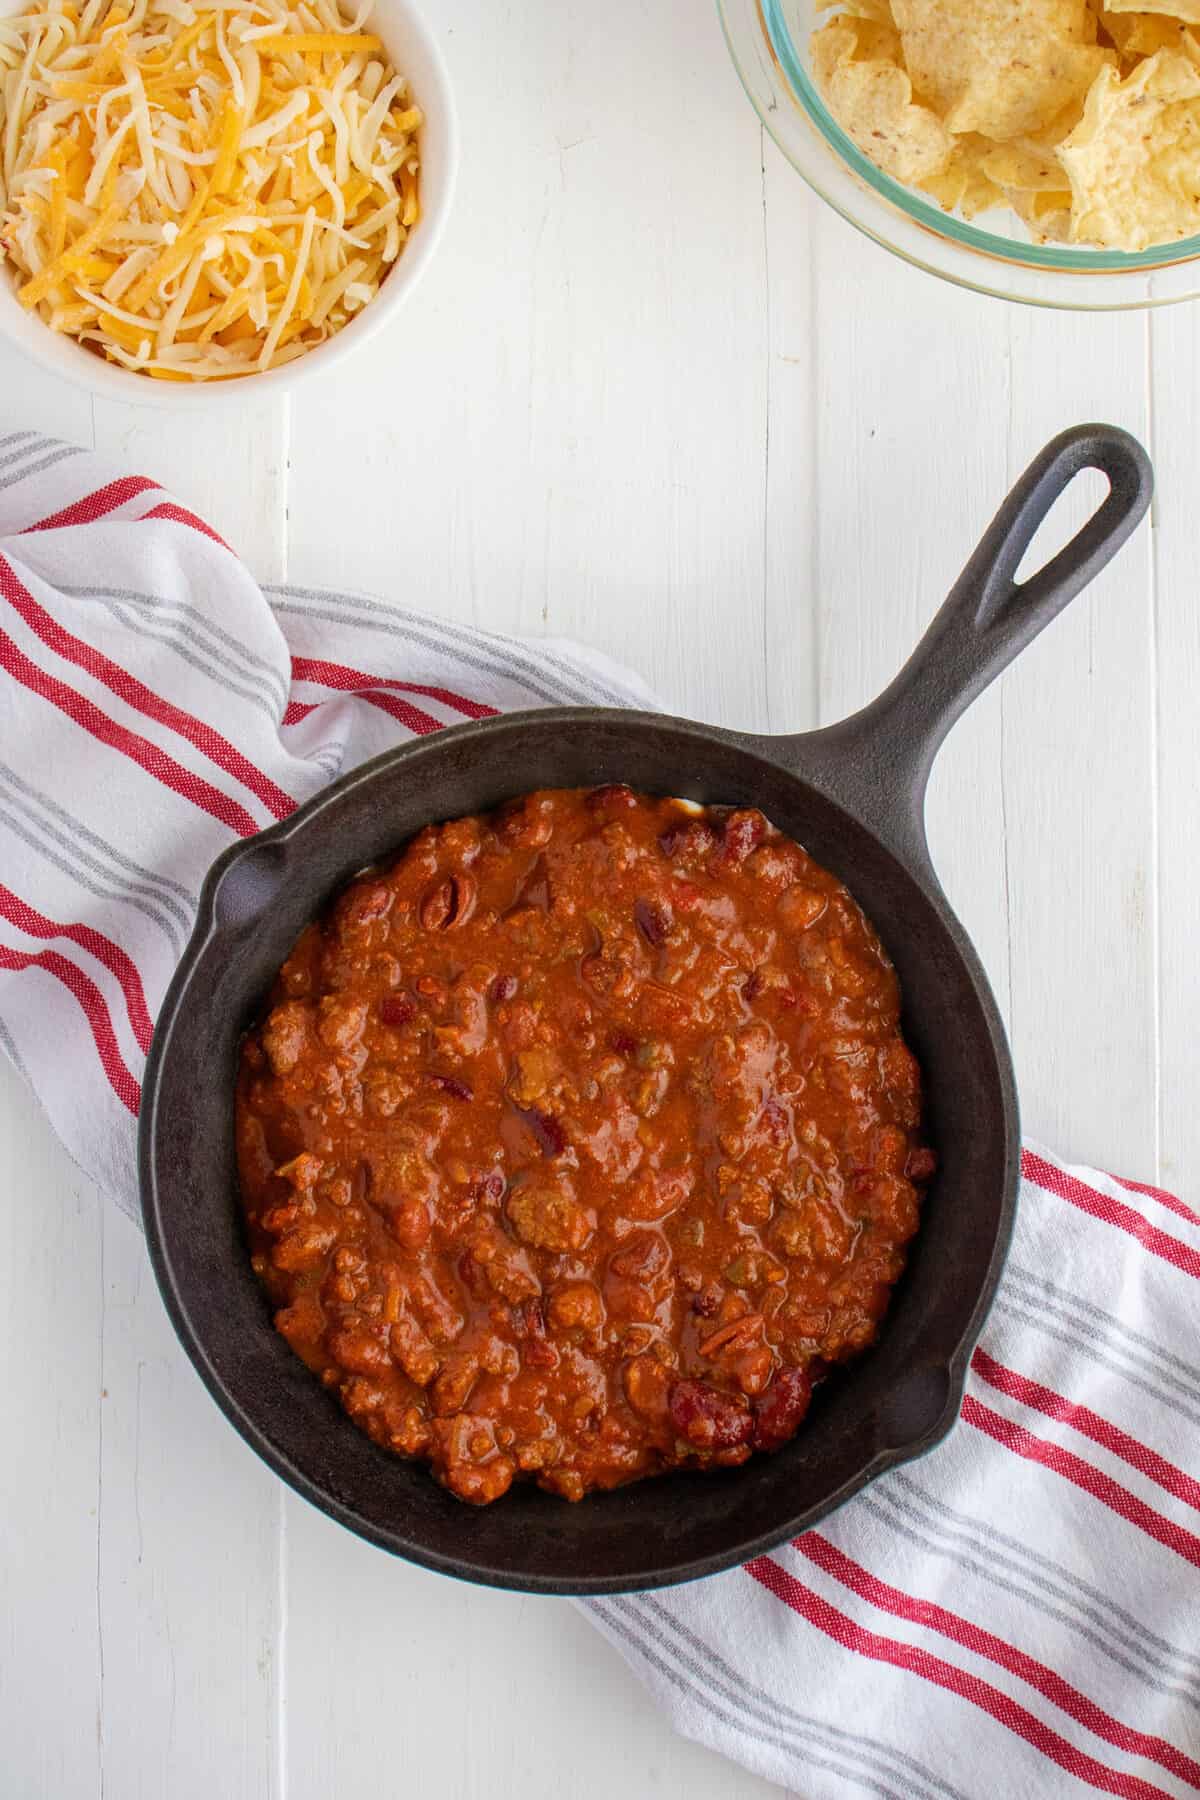 chili layer in cast iron pan